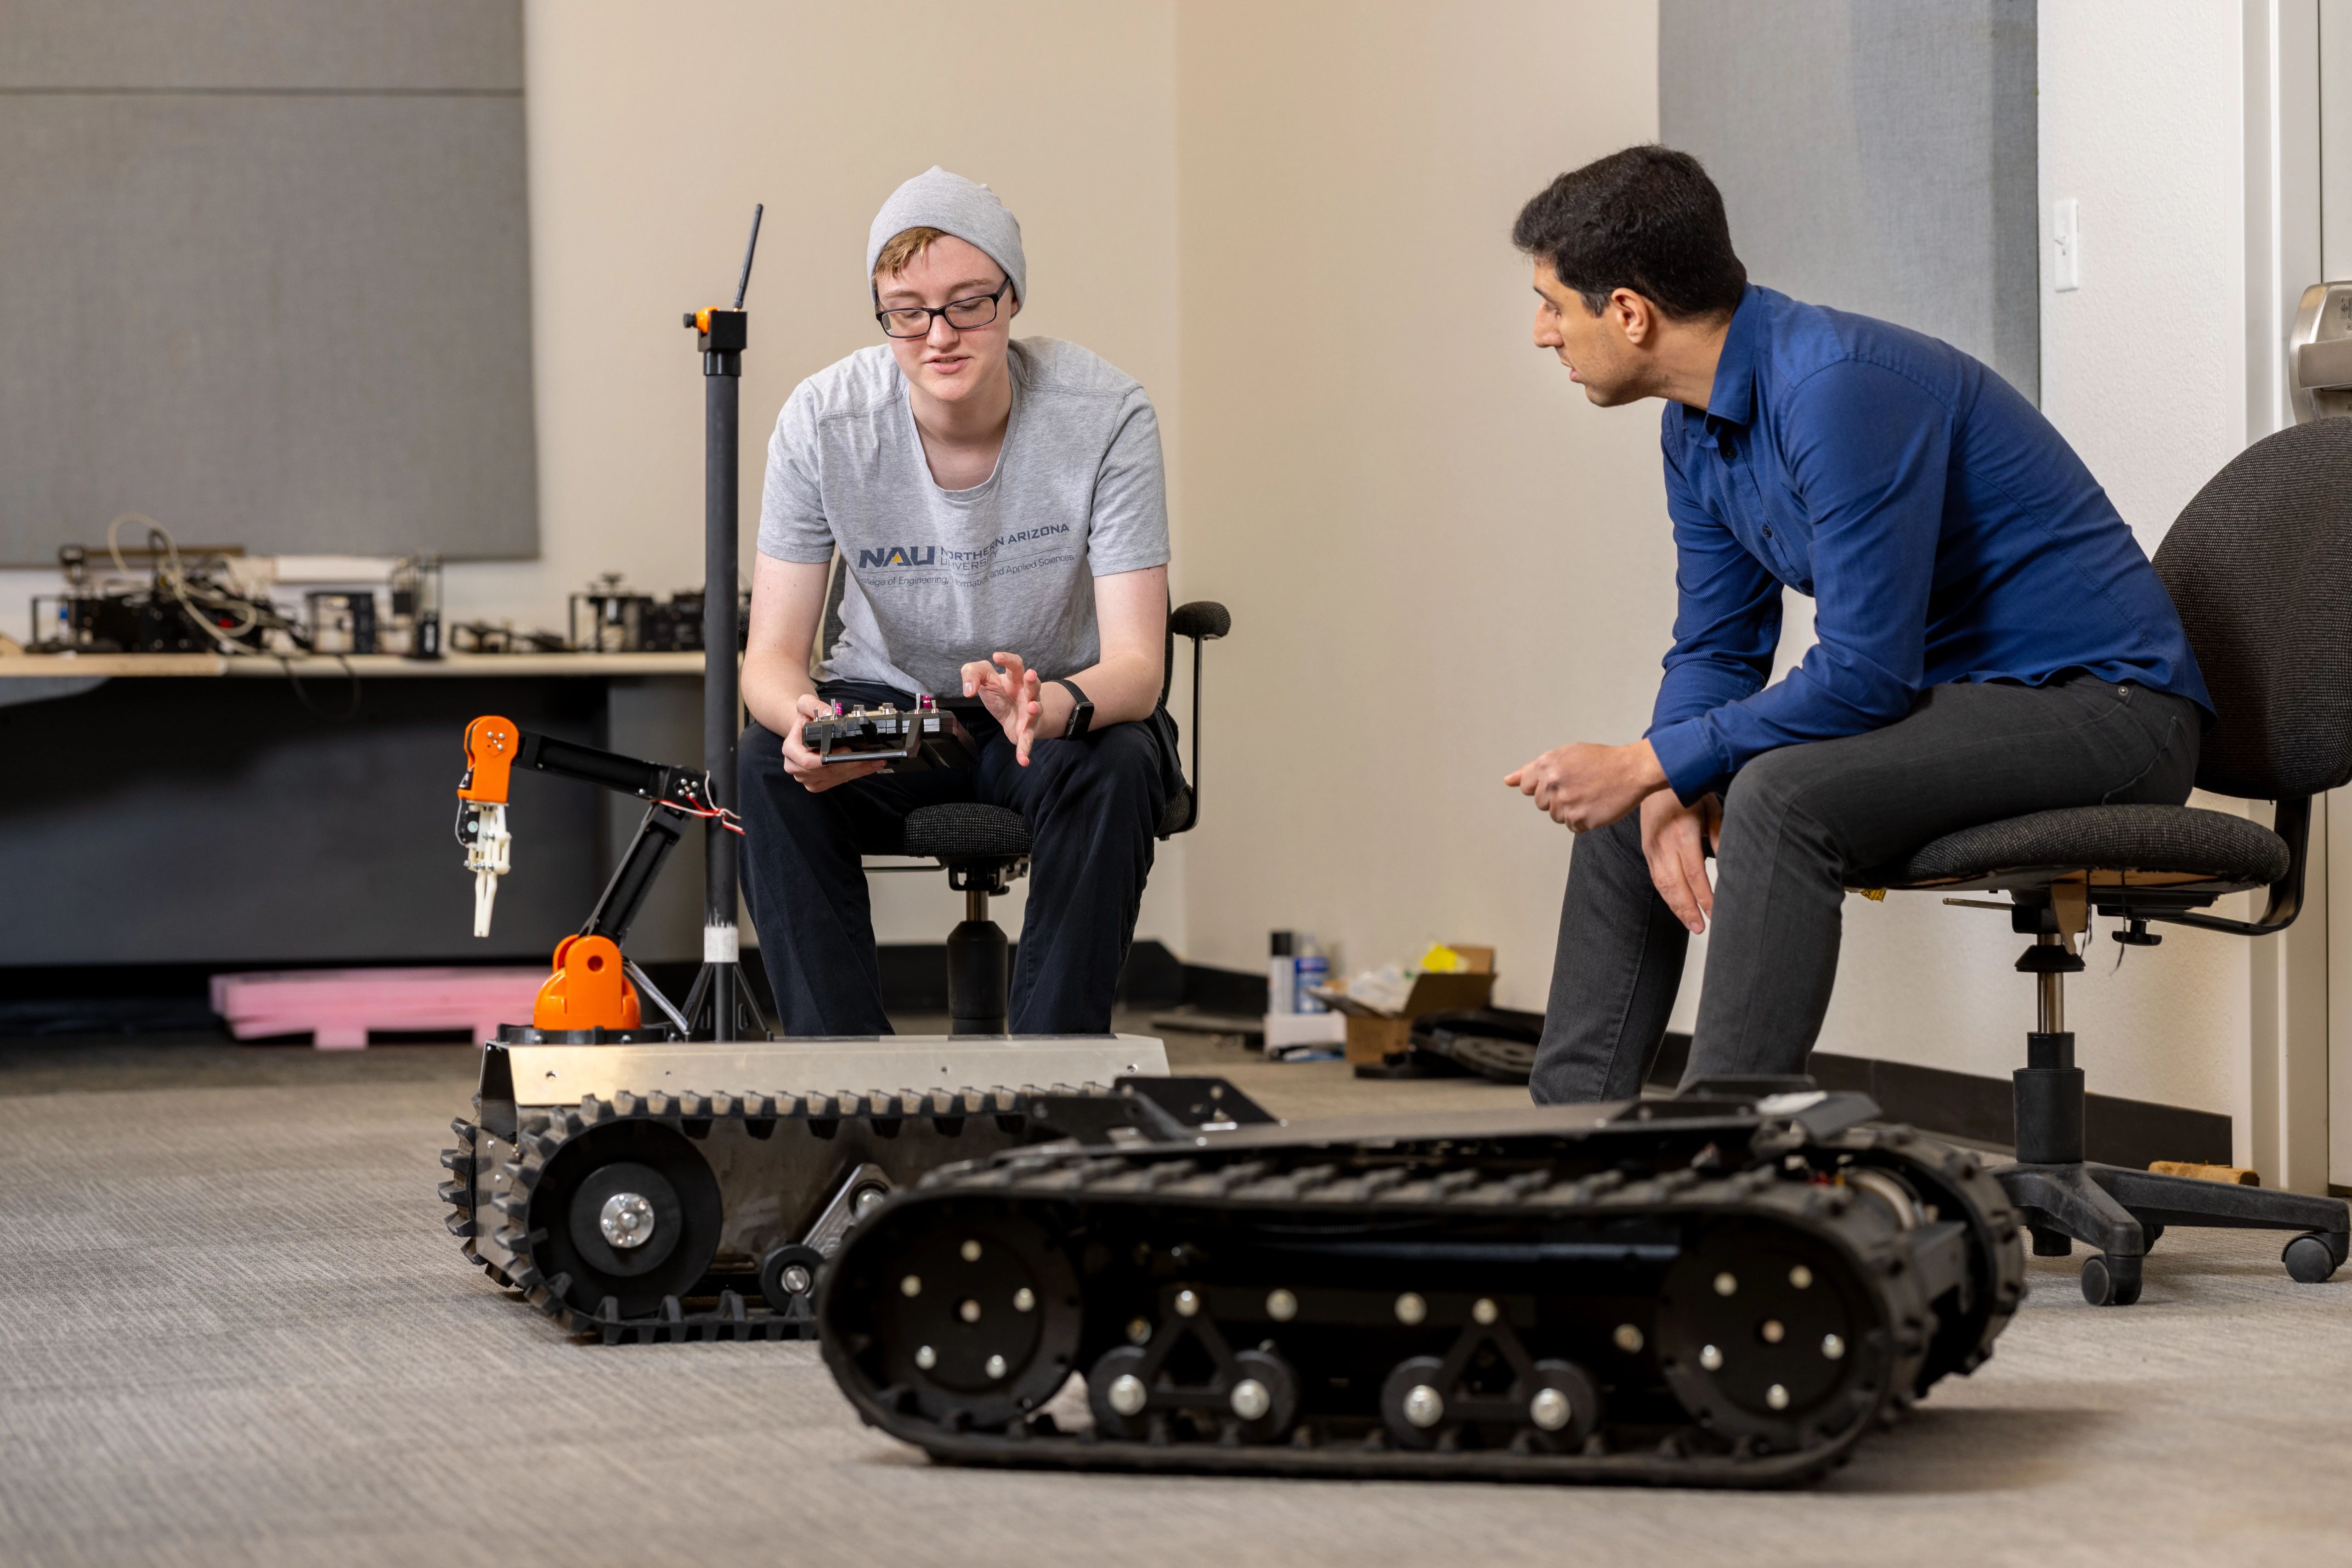 Student and professor examining remote-controlled machines.